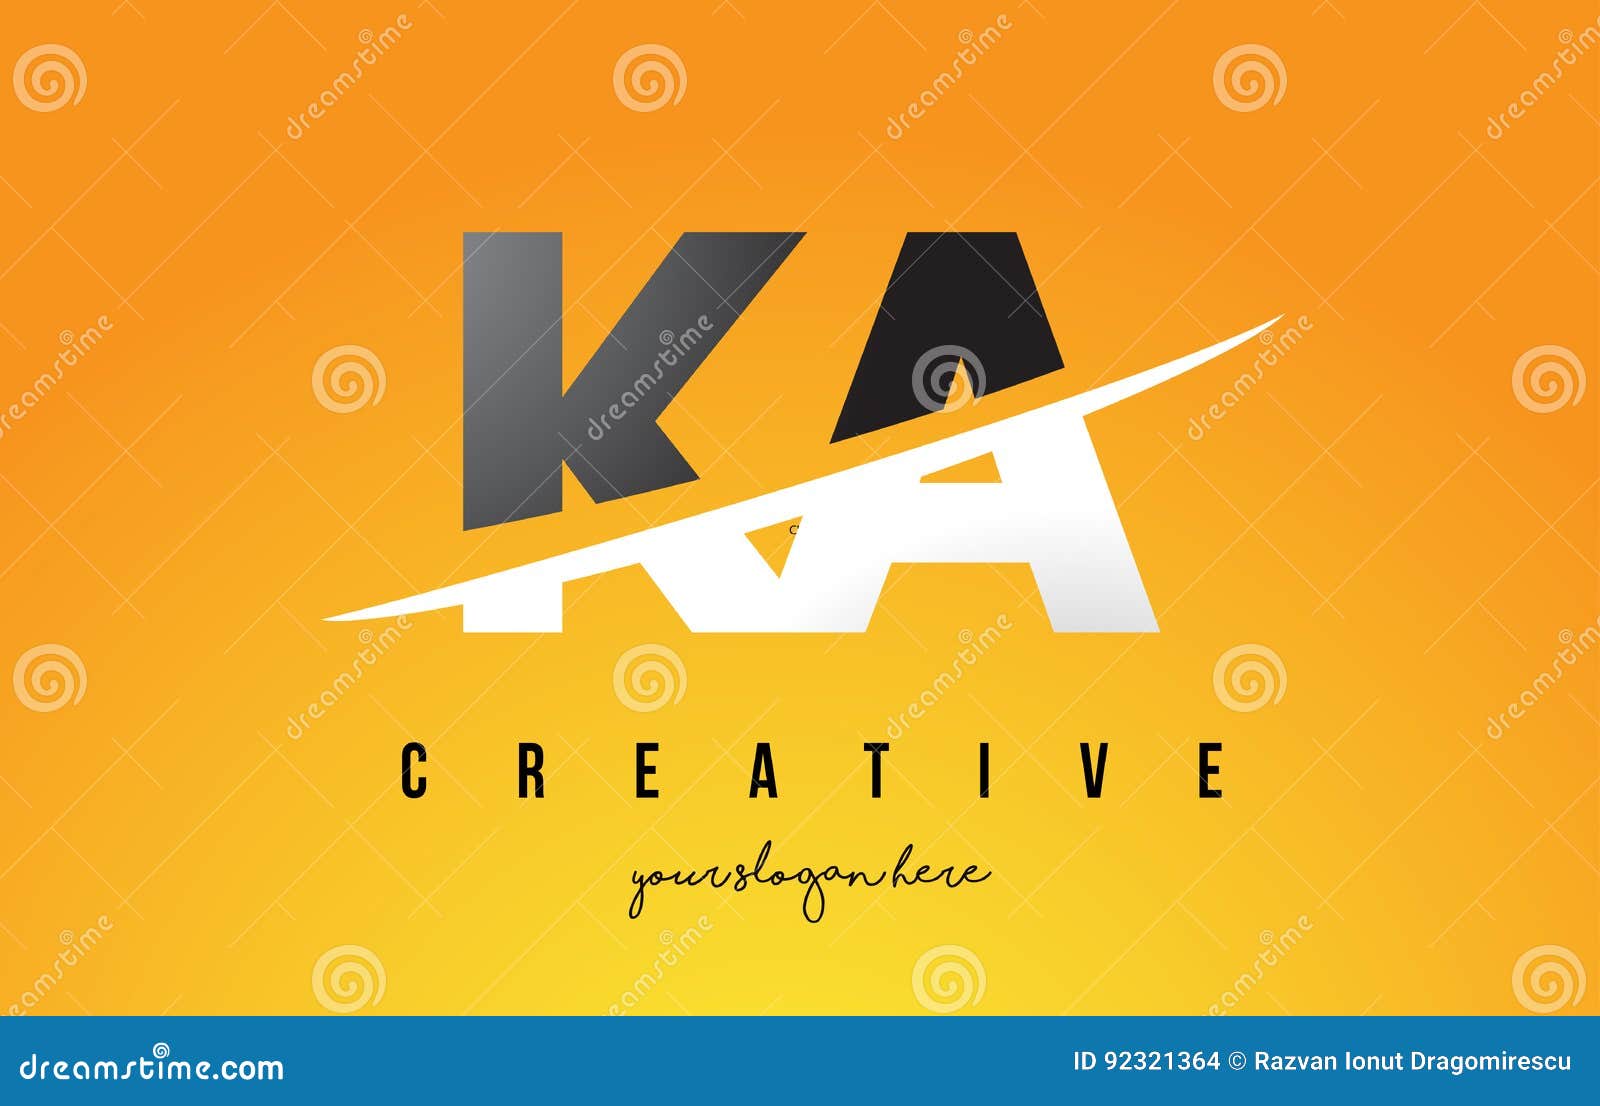 ka k a letter modern logo  with yellow background and swoosh.